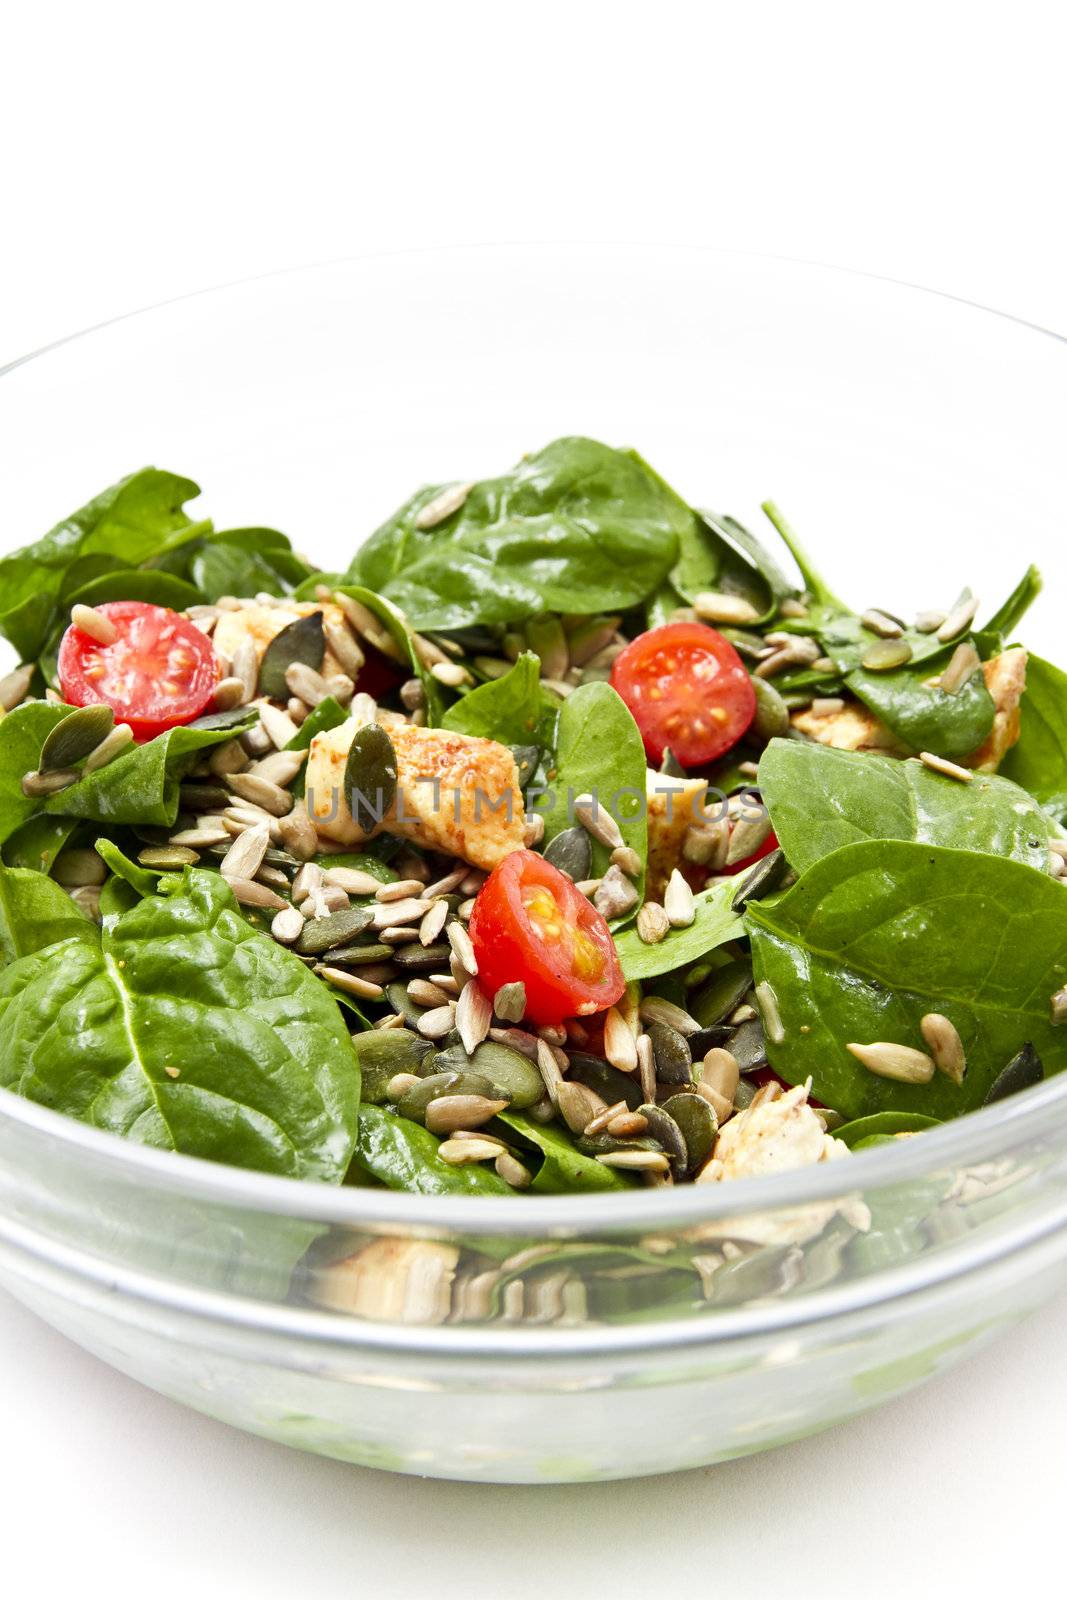 Spinach salad over white background